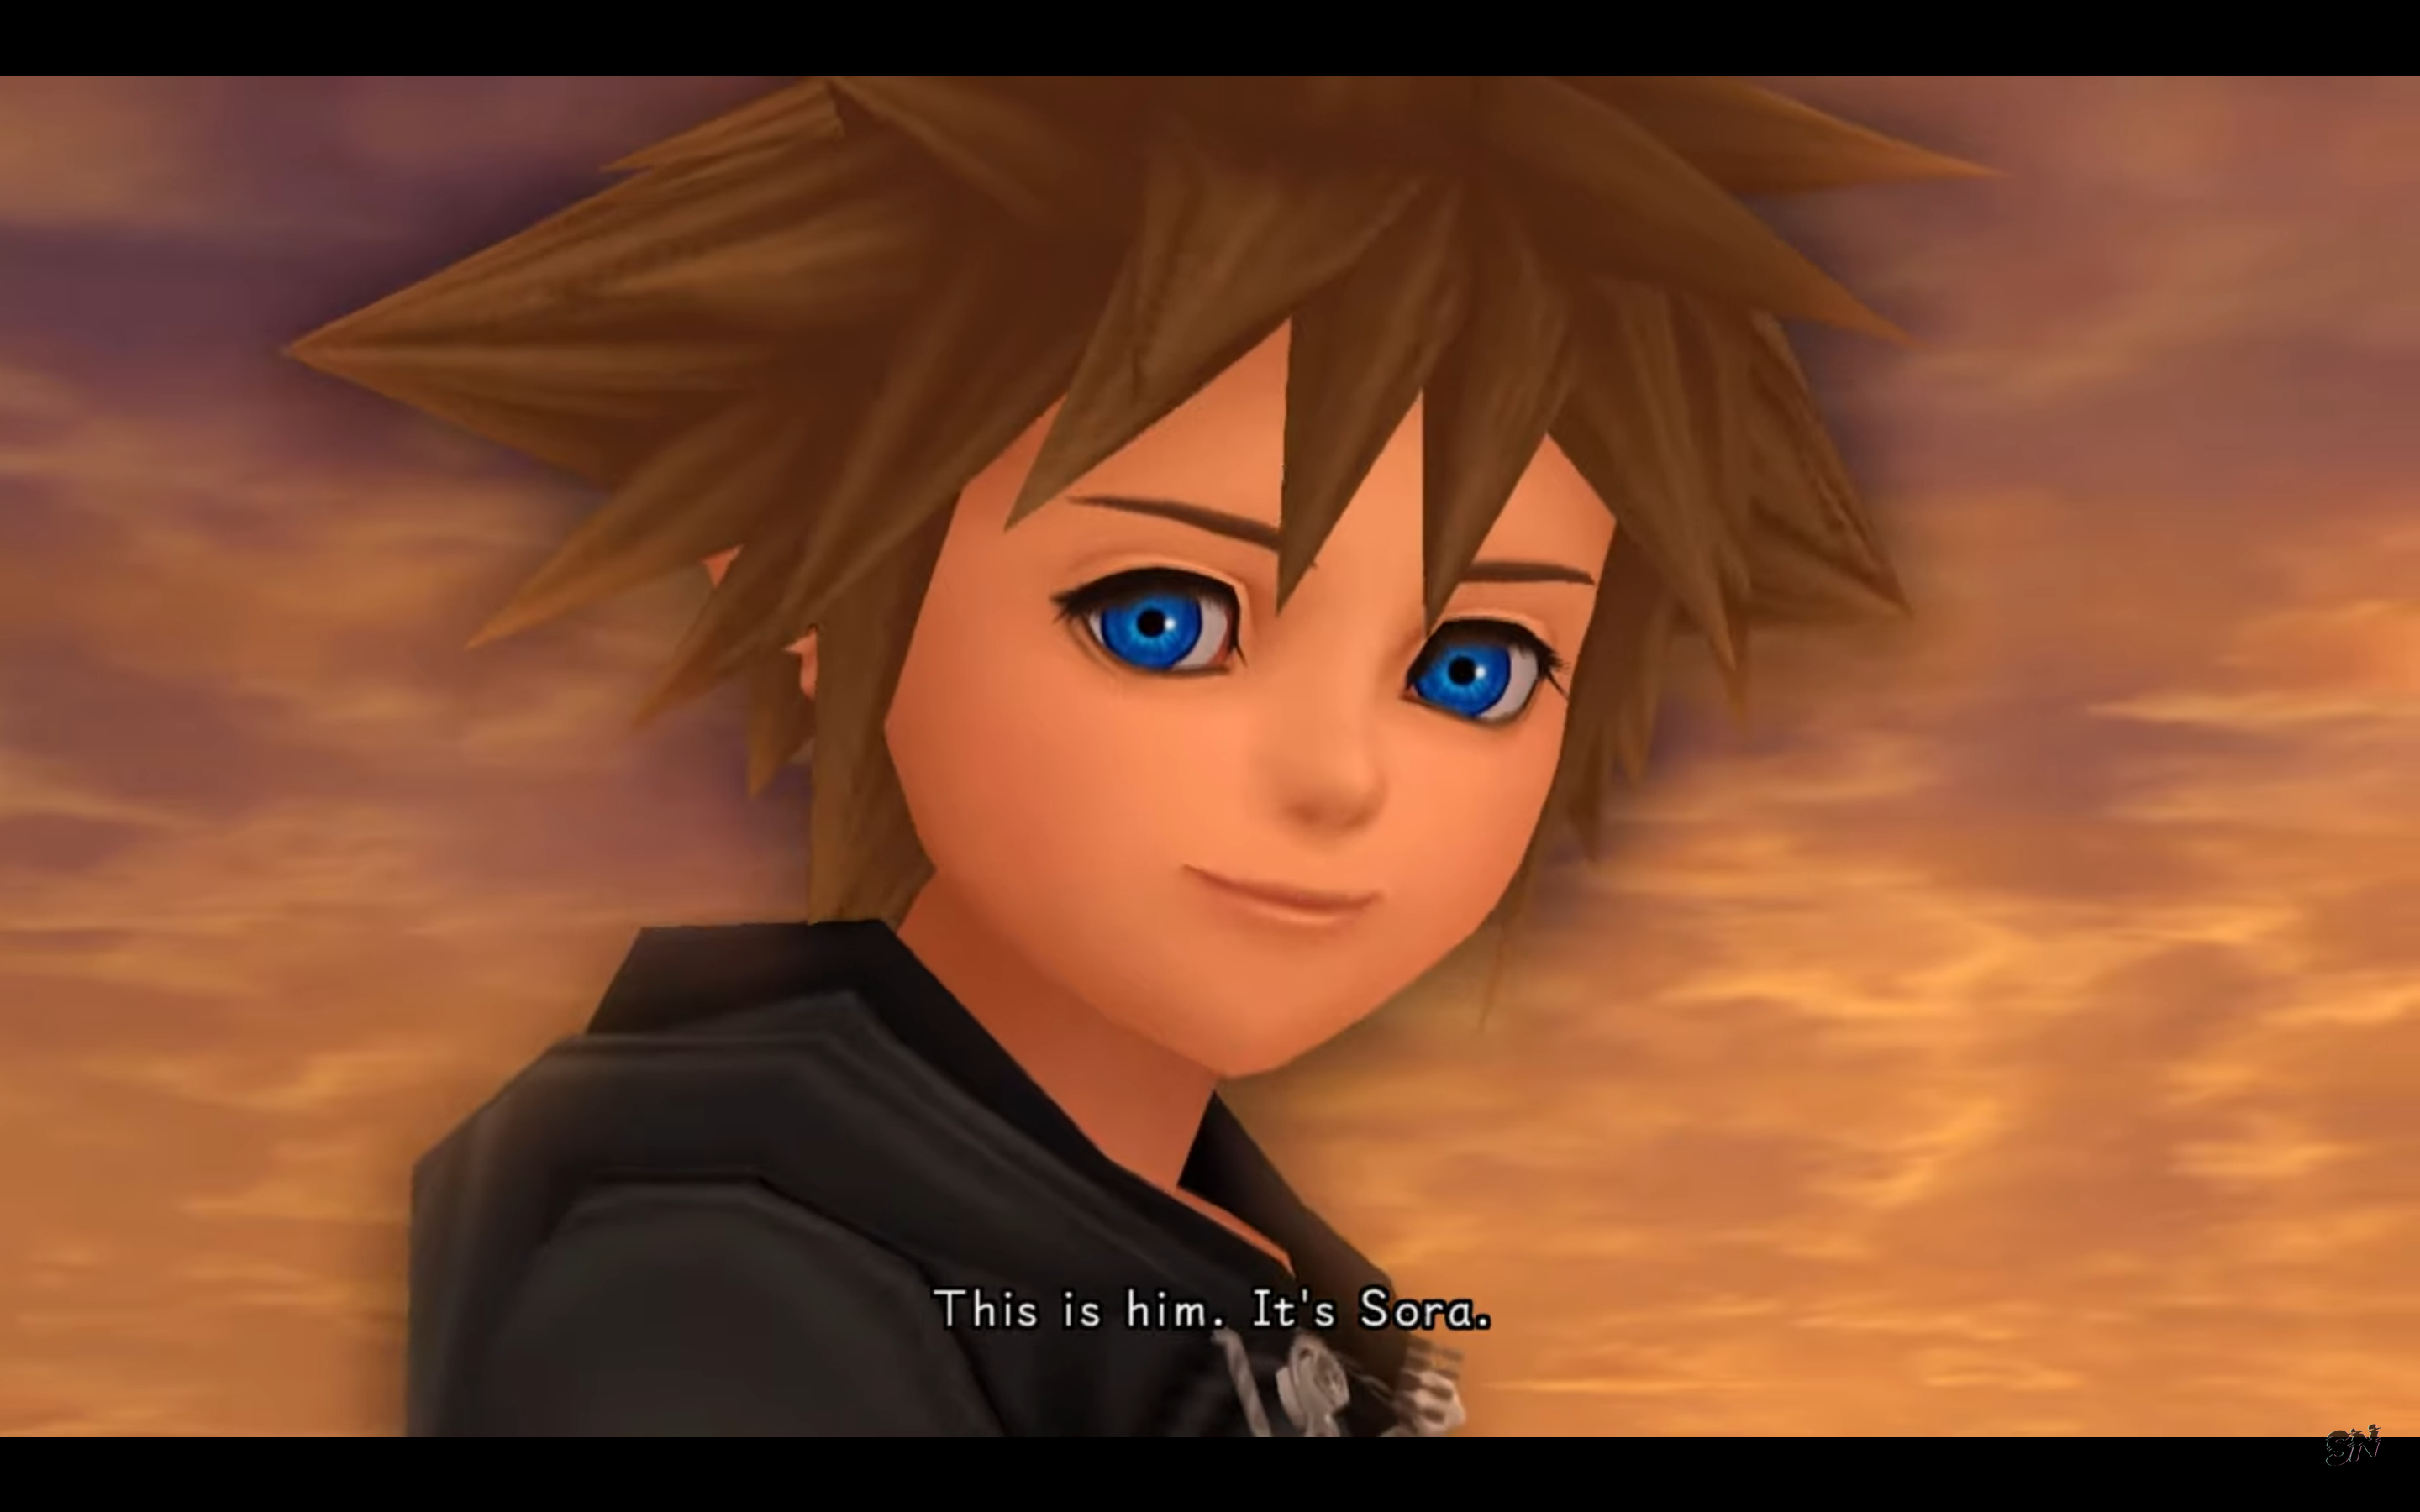 "Kingdom Hearts: 358/2 Days". 2009. Square Enix.
Xion revealed to have Sora's face.